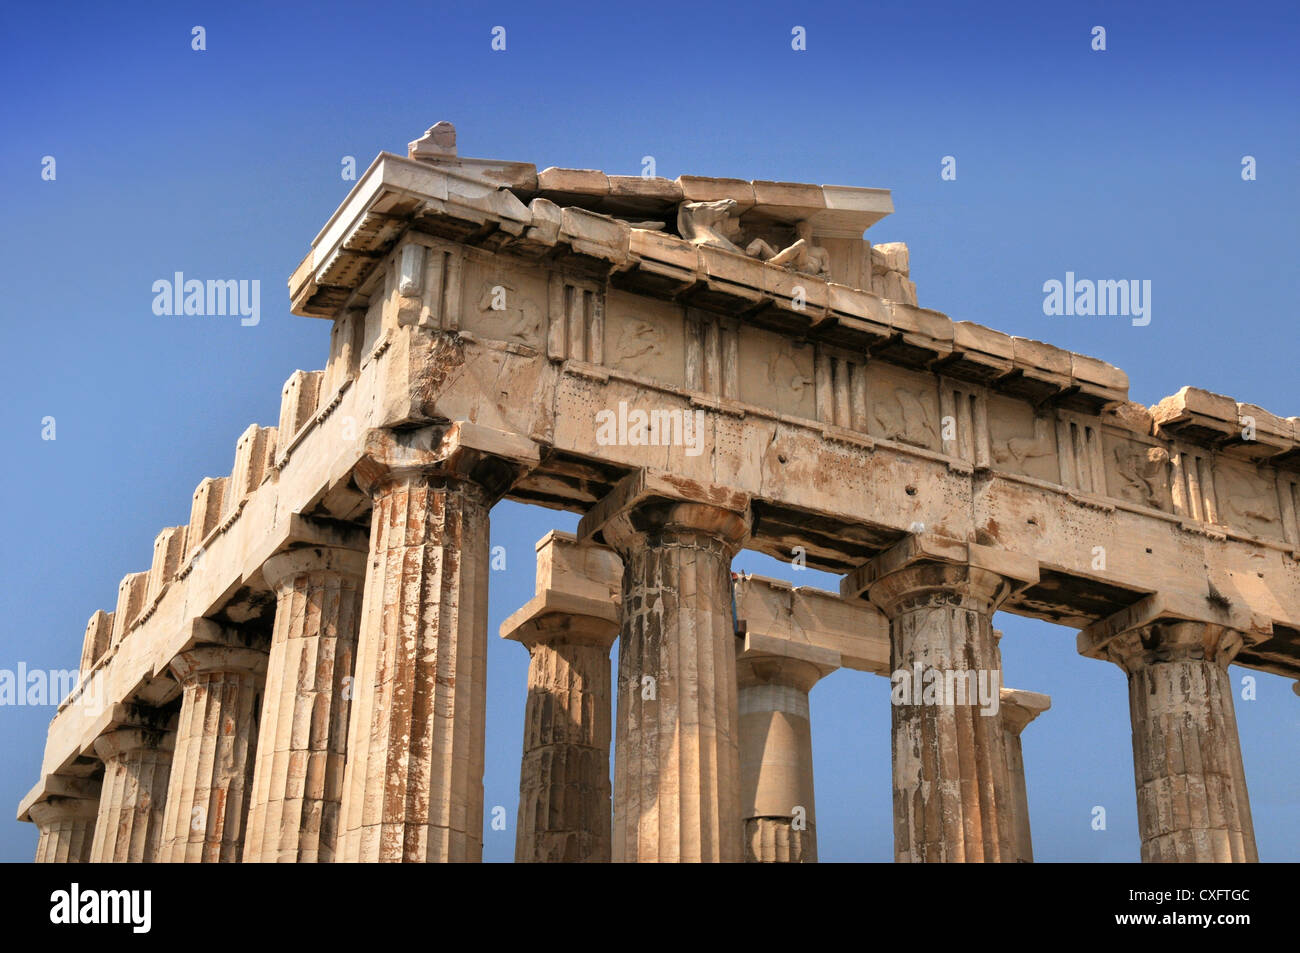 Detail of the pediment of the Parthenon temple on the Acropolis in Athens, Greece Stock Photo